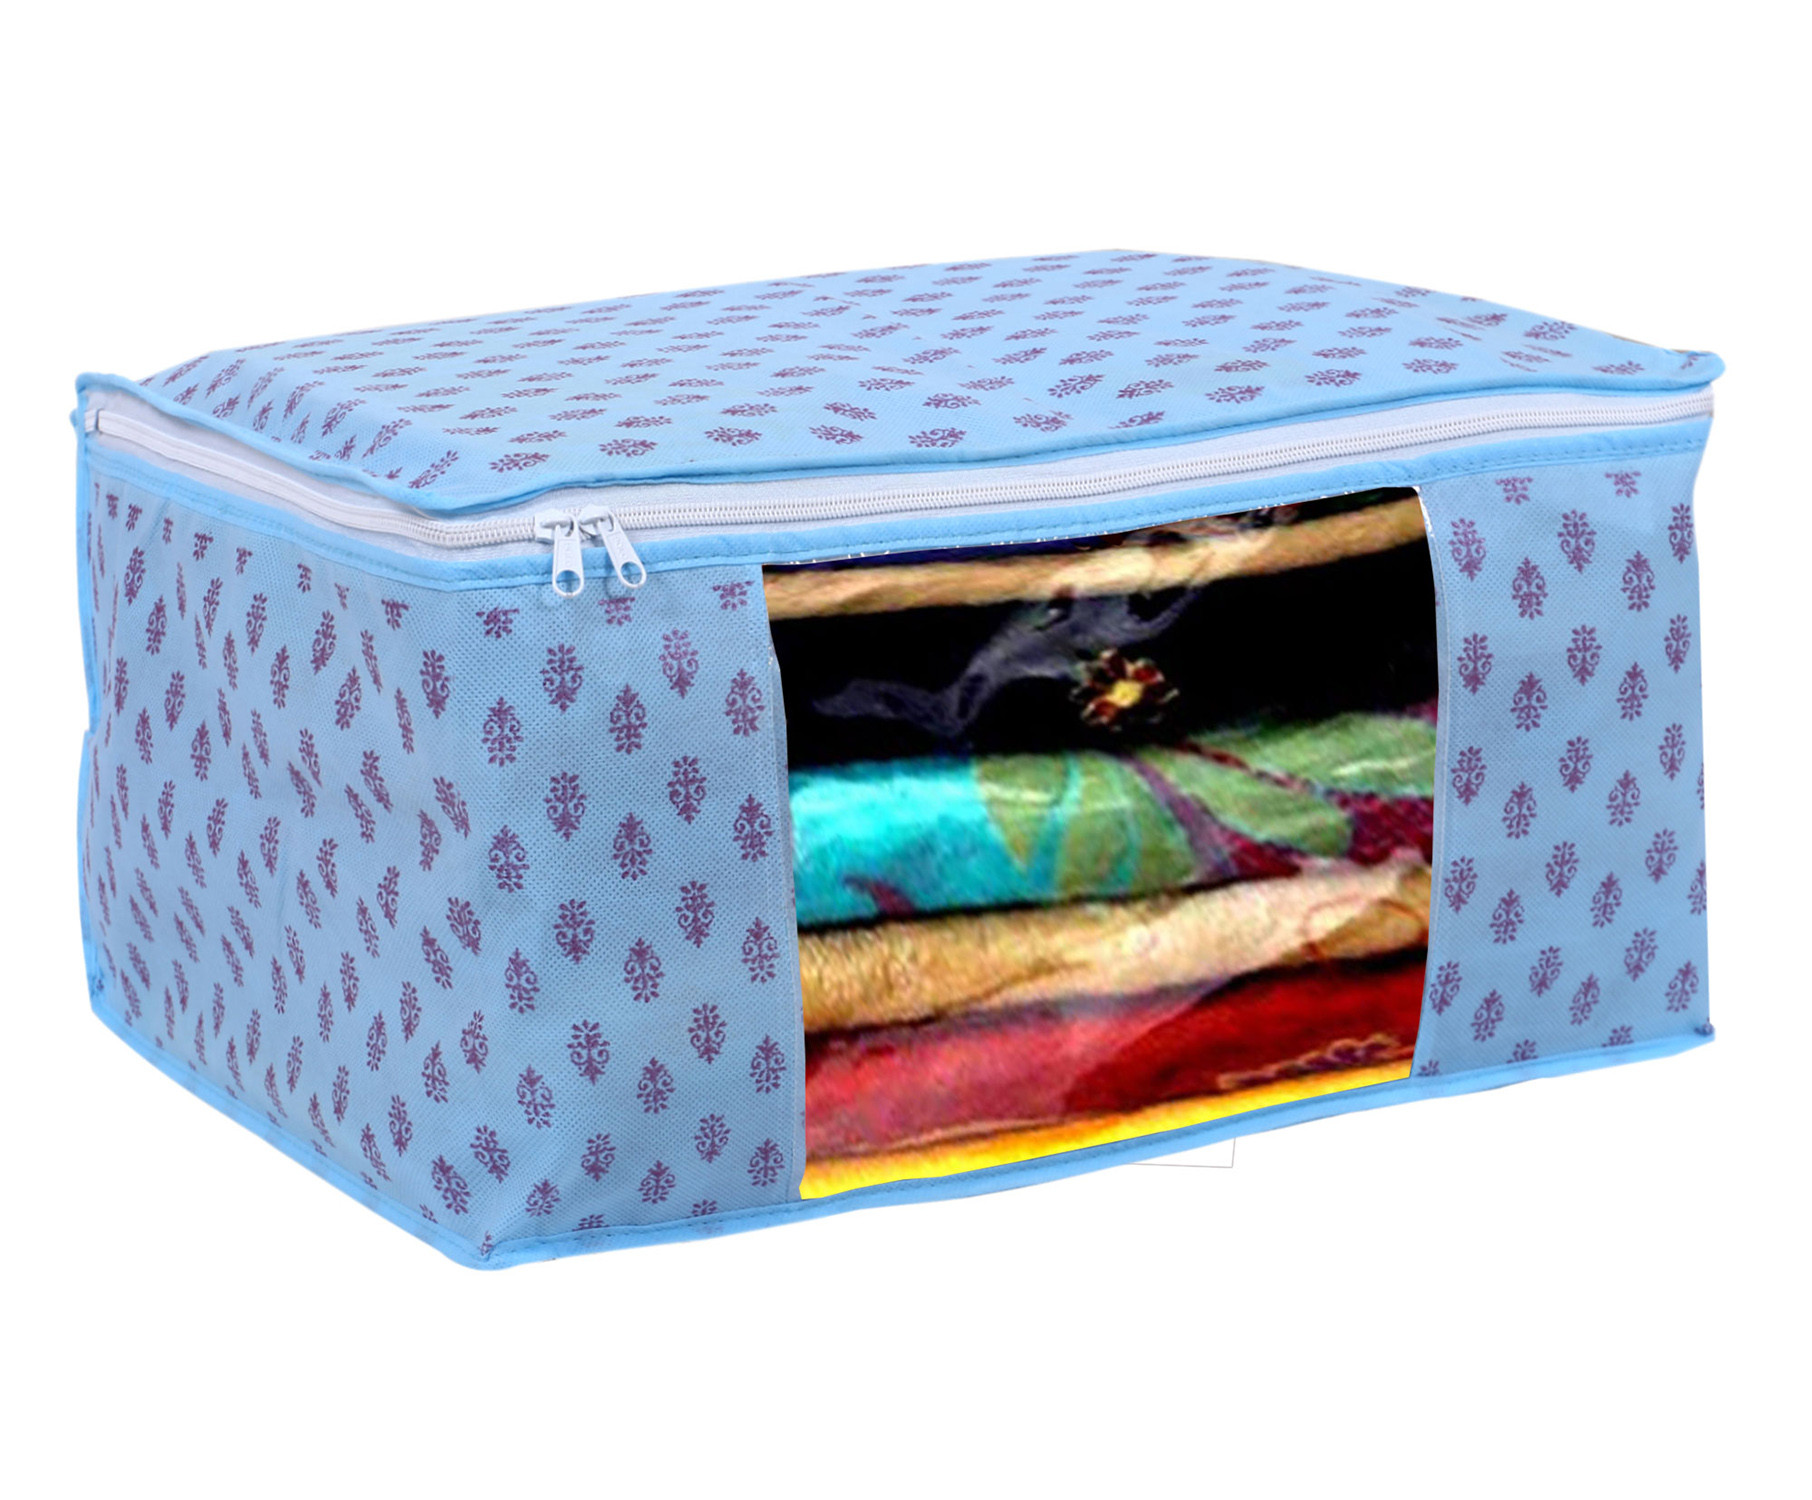 Kuber Industries Floral Print Non-Woven Foldable Saree Cover|Clothes Storage For Saree, Lehenga, Suit With Top Transparent (Sky Blue)